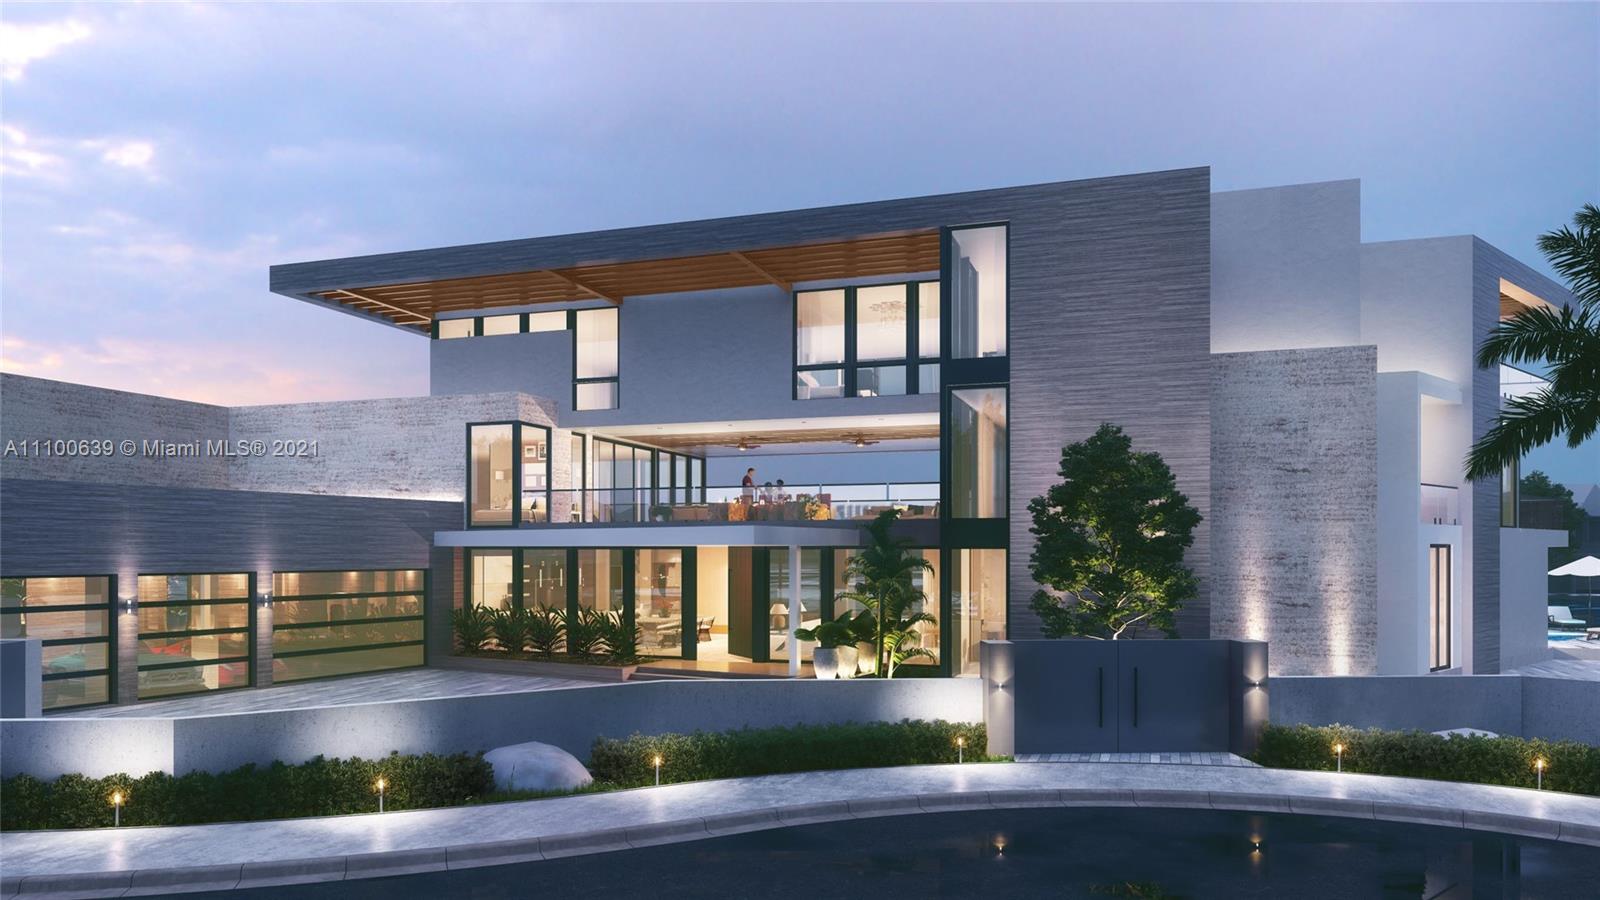 One of the best homes built in Fort Lauderdale. Designed by Affiniti Architects with 185' of waterfrontage one house in from the point, in sought after Seven Isles. Custom 3-story Modern Masterpiece with intracoastal views. Over 10,000 sq ft 6 Bedrooms 7 Full Baths and 2 Half Baths, Office, Clubroom, Gym, 4 car garage, and much more.